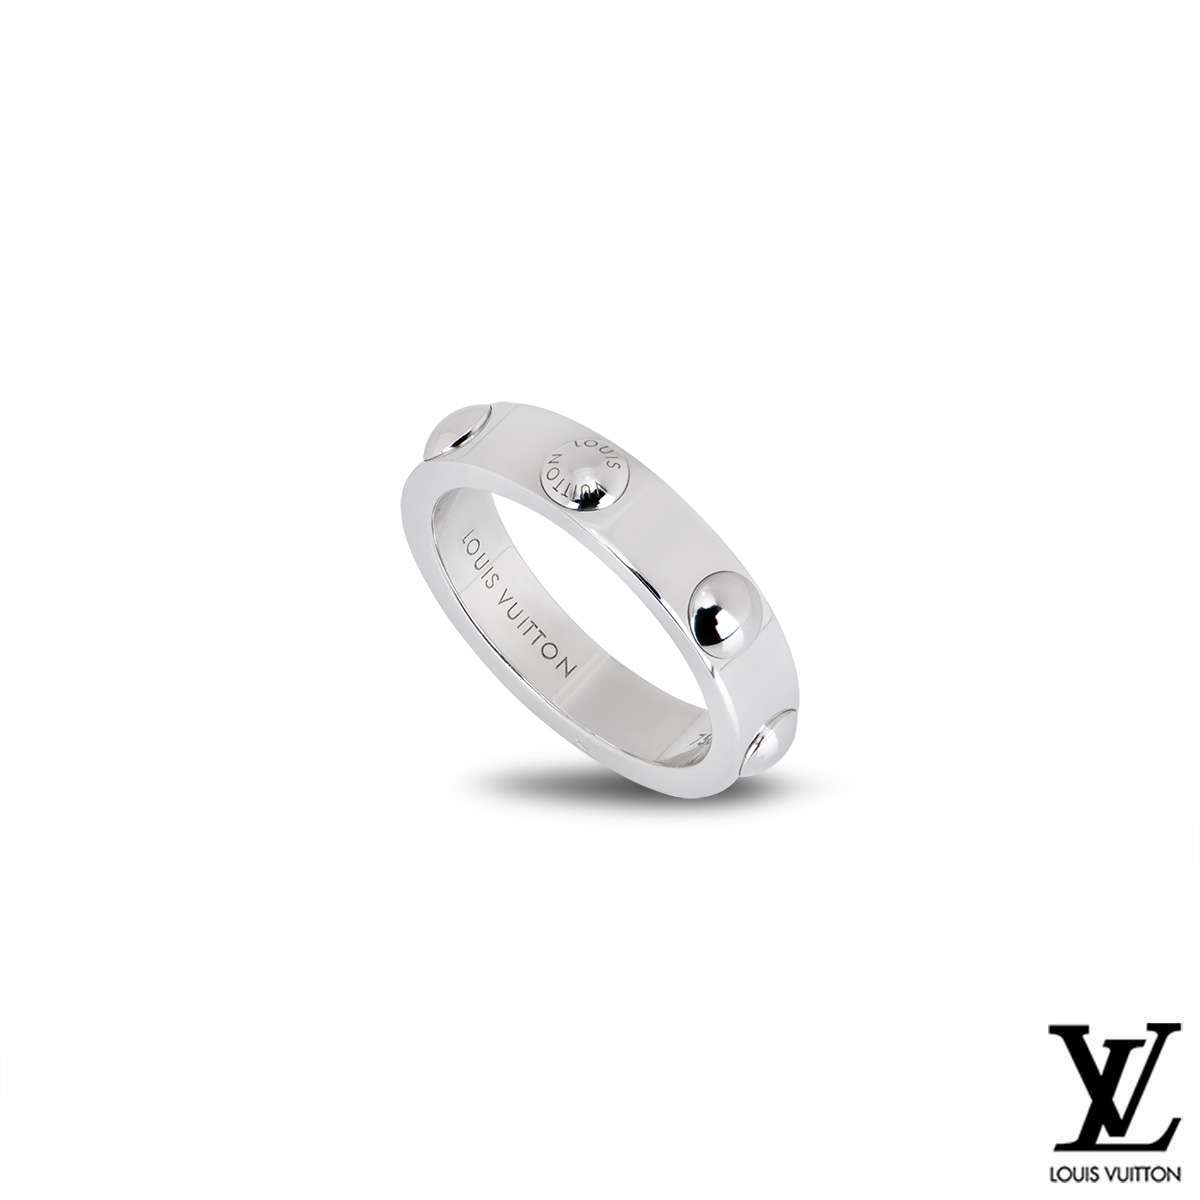 Louis Vuitton - Authenticated Empreinte Ring - White Gold Silver for Women, Good Condition